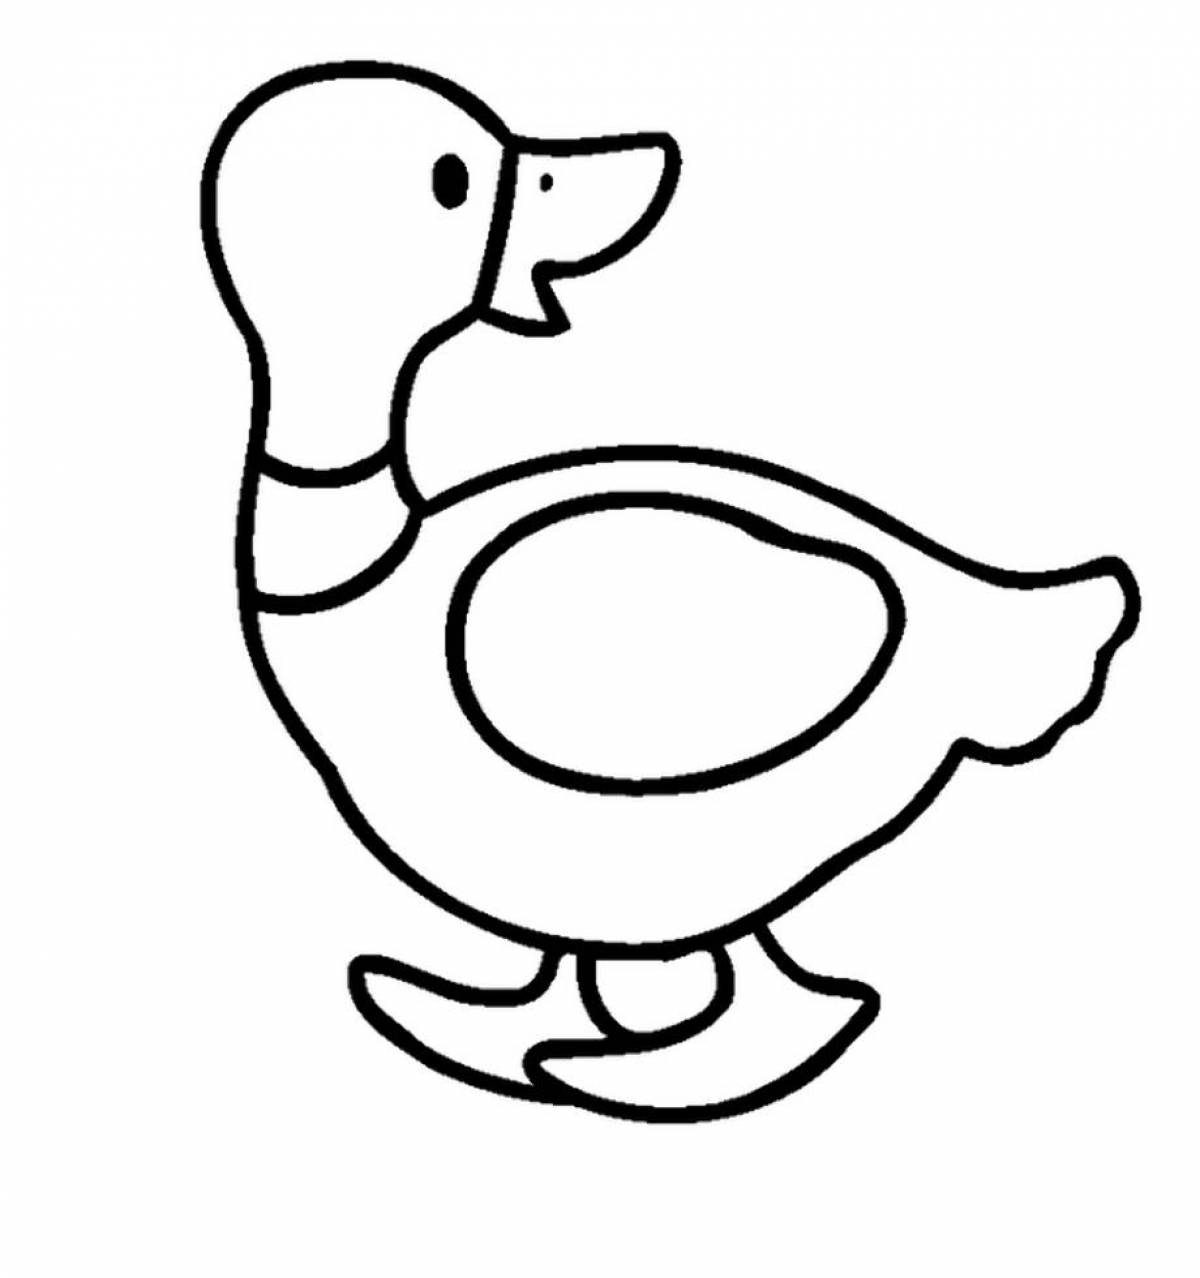 Charming duck lalaphan coloring book